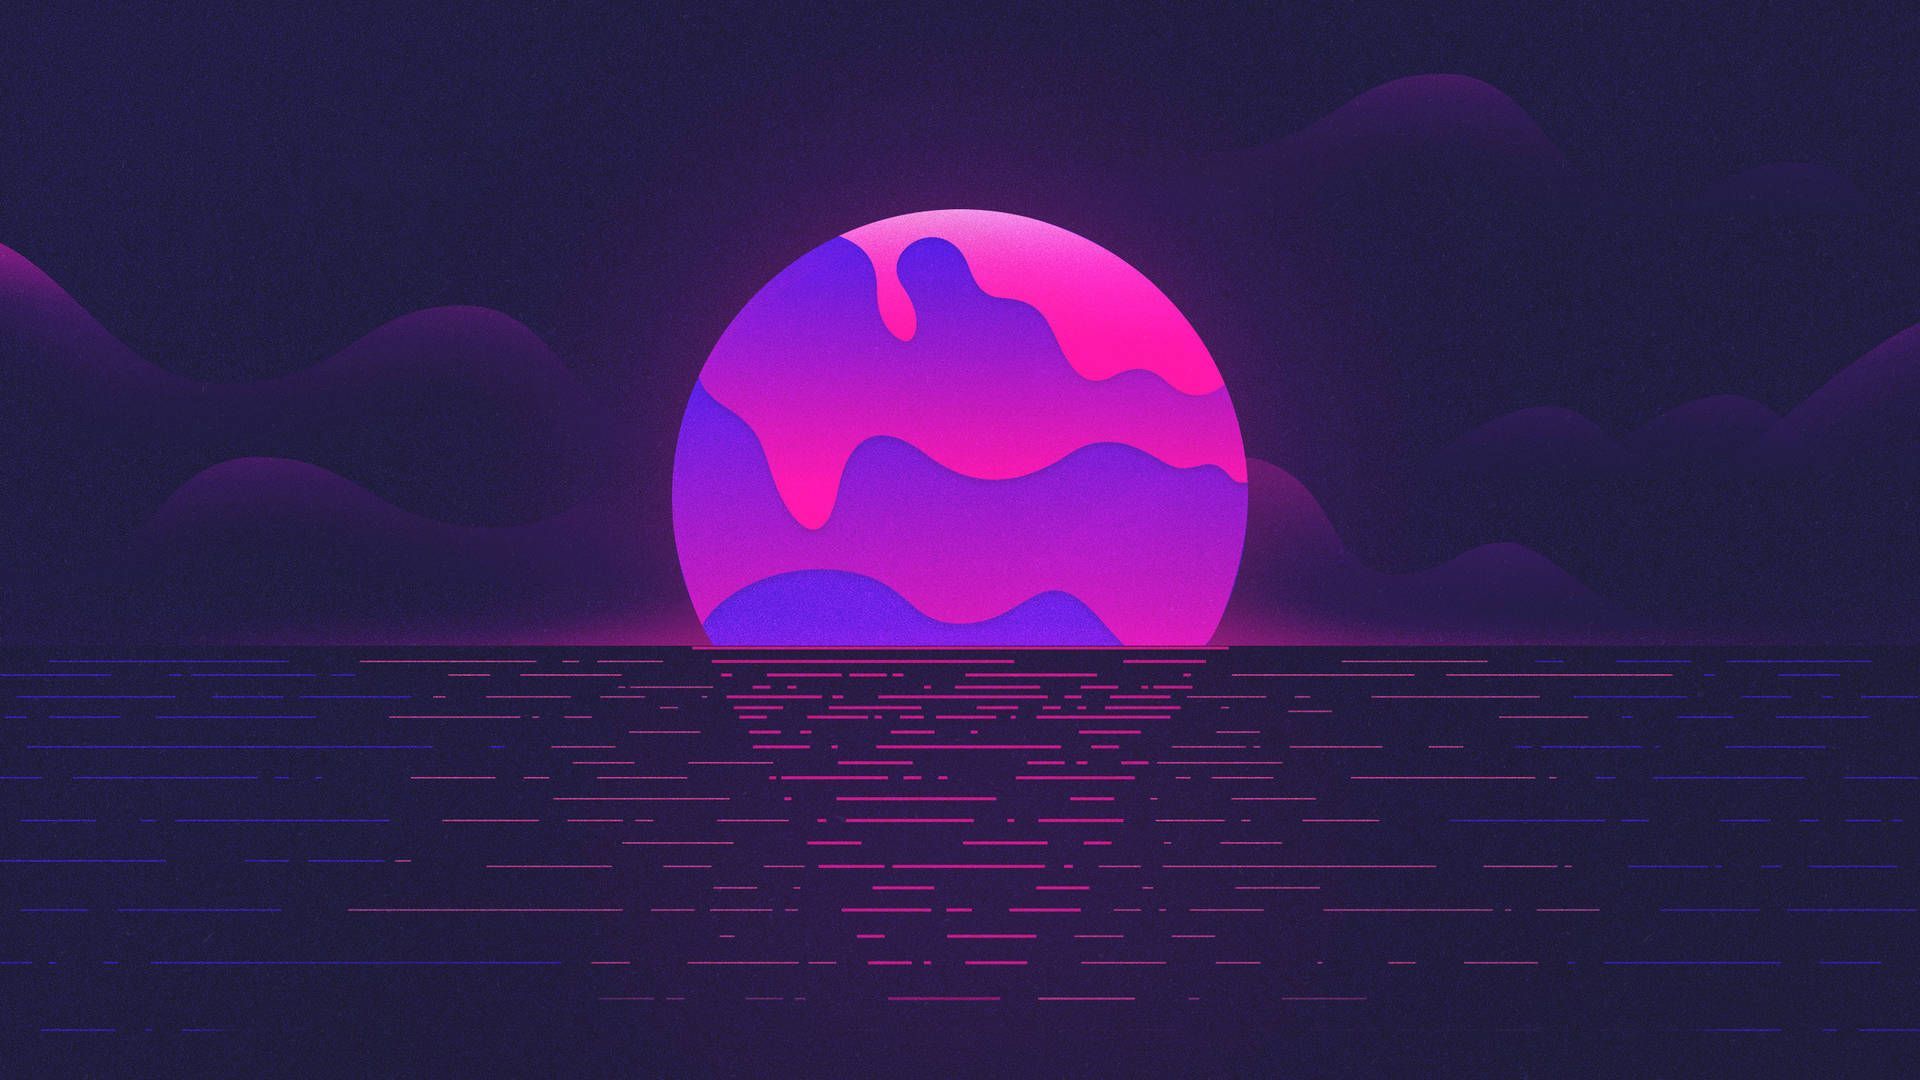 The sun sets over the sea, creating a pink and purple sunset. - Dark vaporwave